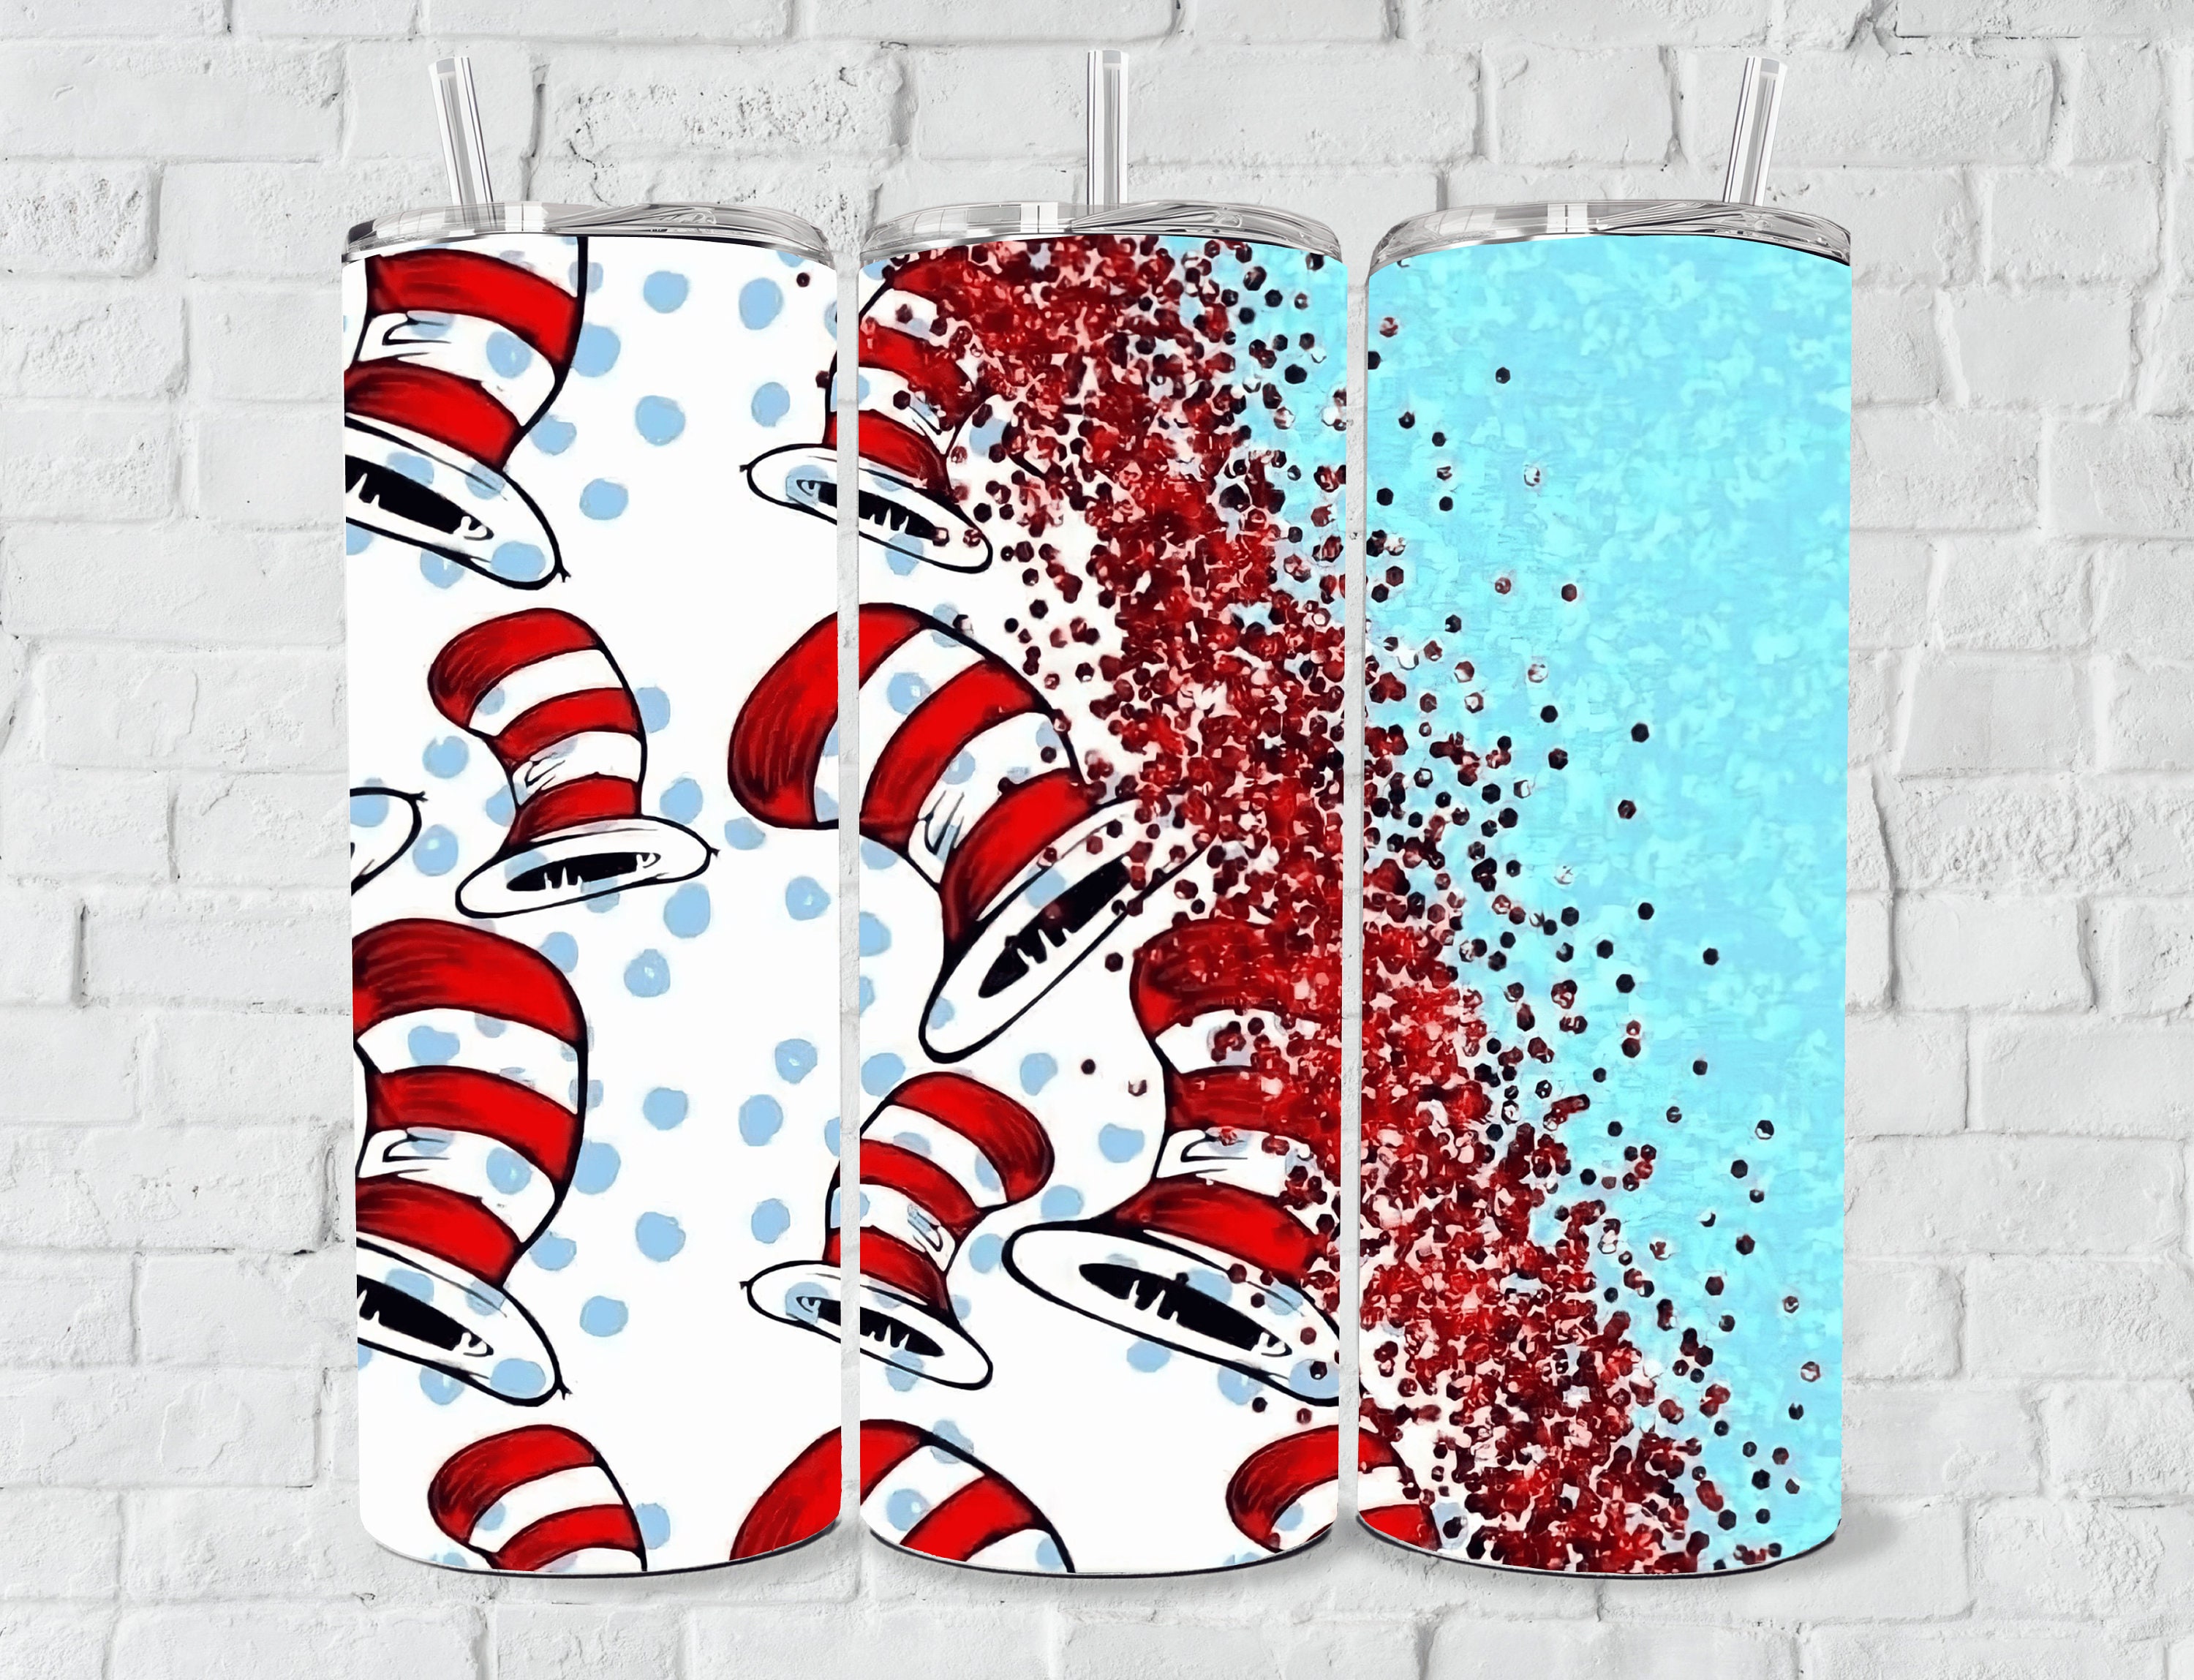 Personalized Dr Seuss I Will Drink Dr Pepper Tumbler - Teeruto